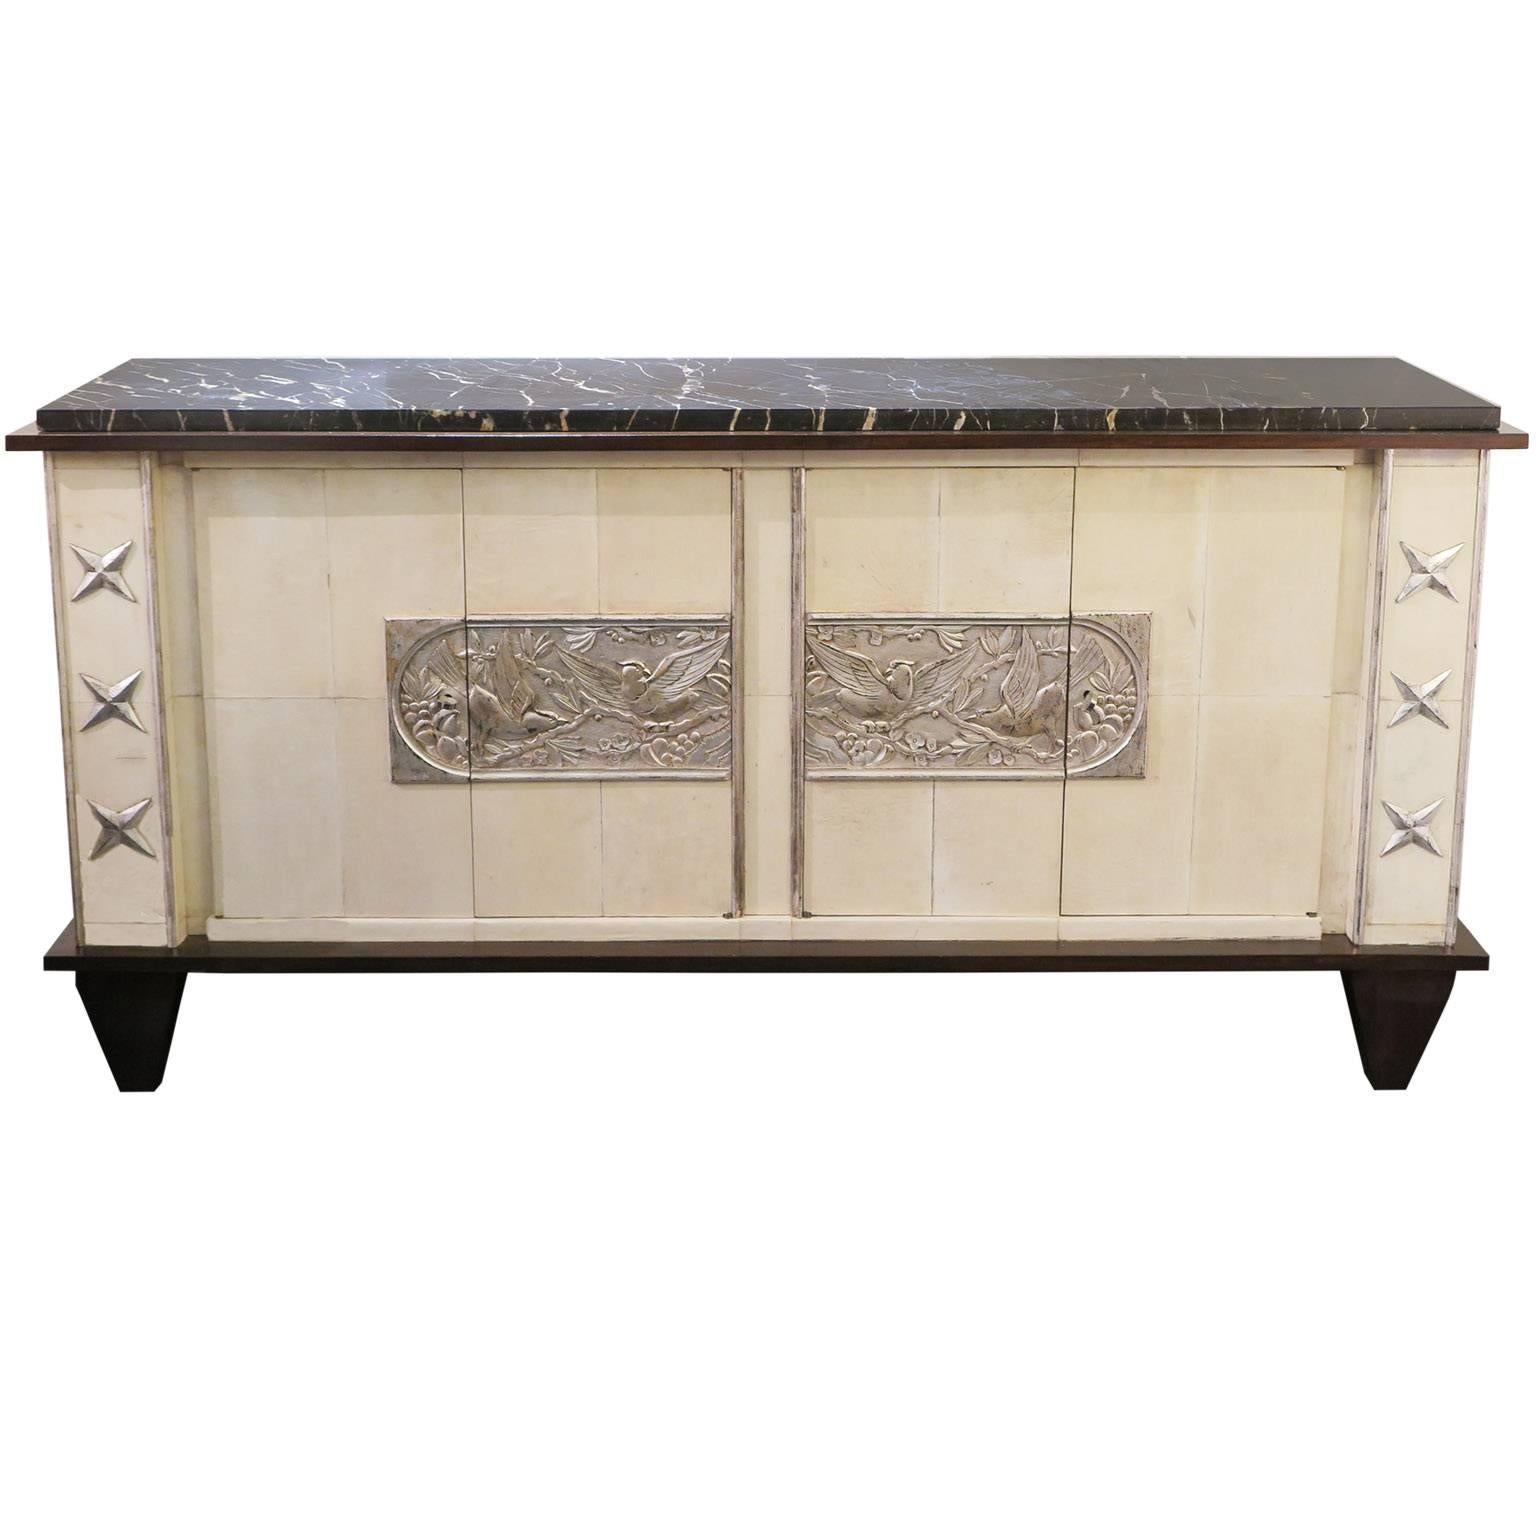 Sideboard in Parchment with Silver Relief-Work, France, 1940s-1950s